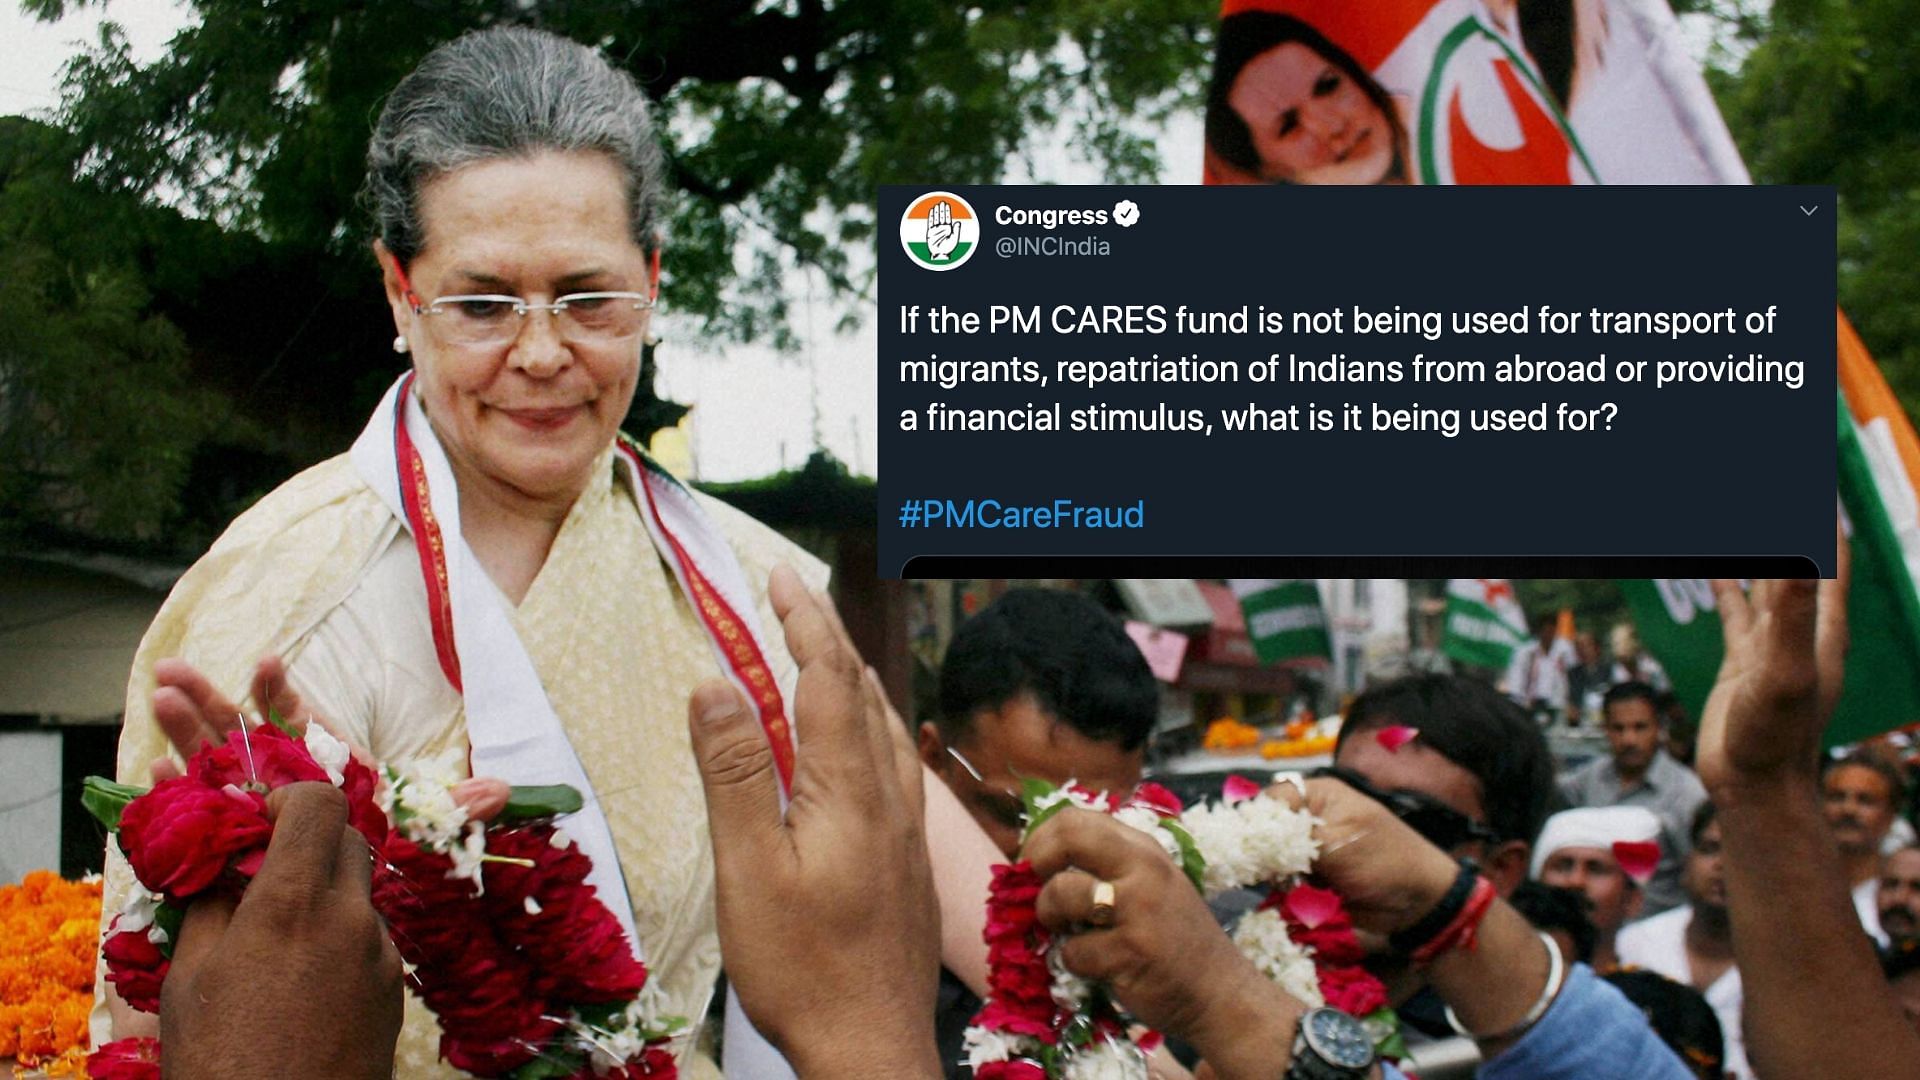 On 11 May, Congress’ Twitter handle put out a series of tweets on PM-CARES fund, using the hashtag ‘PMCareFraud’.